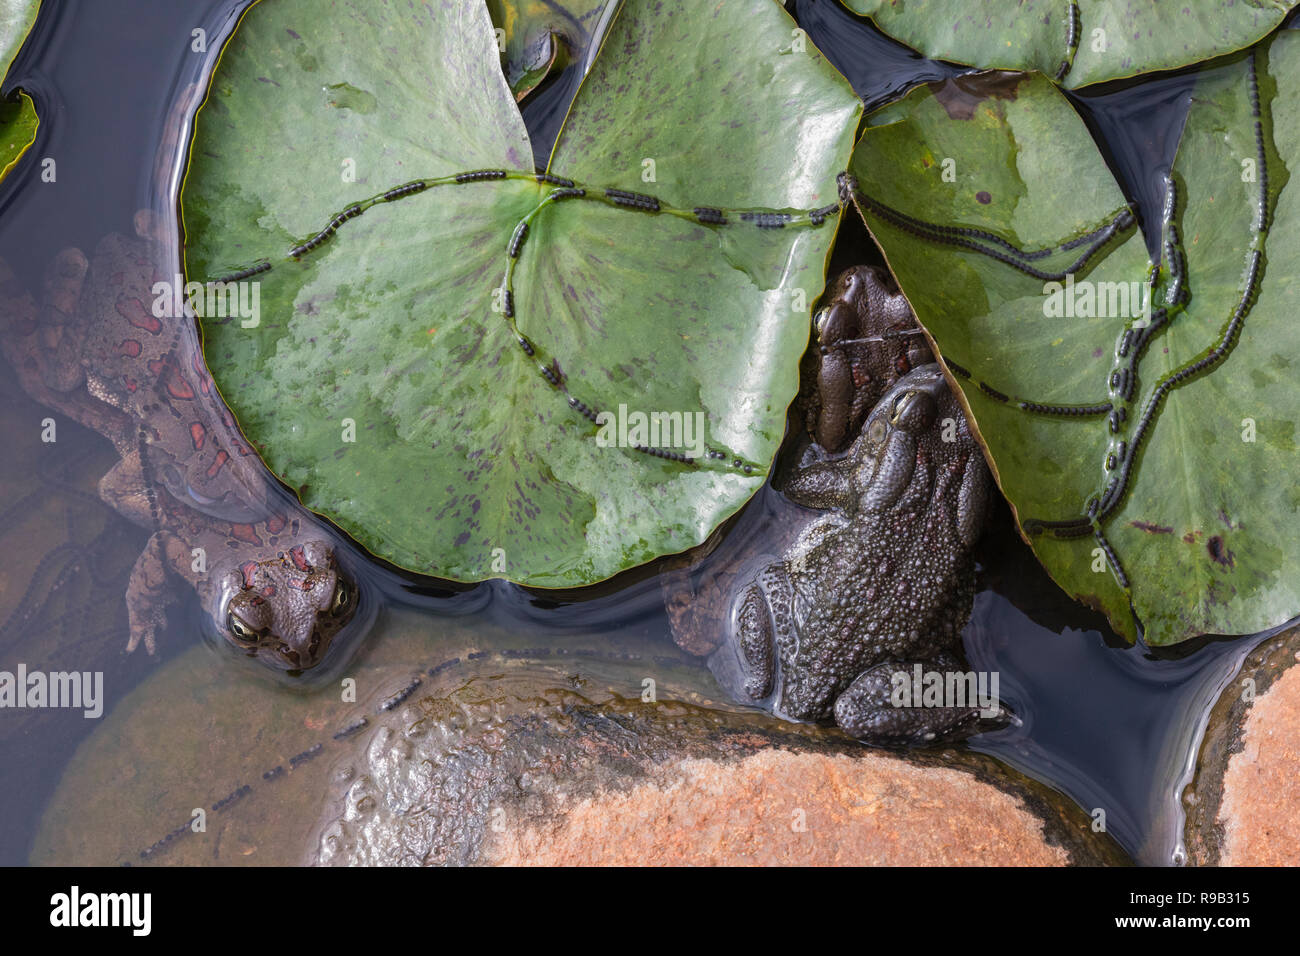 Eastern olive toads (Amietophrynus garmani) mating, with spawn chains, Zimanga private game reserve, KwaZulu-Natal, South Africa Stock Photo